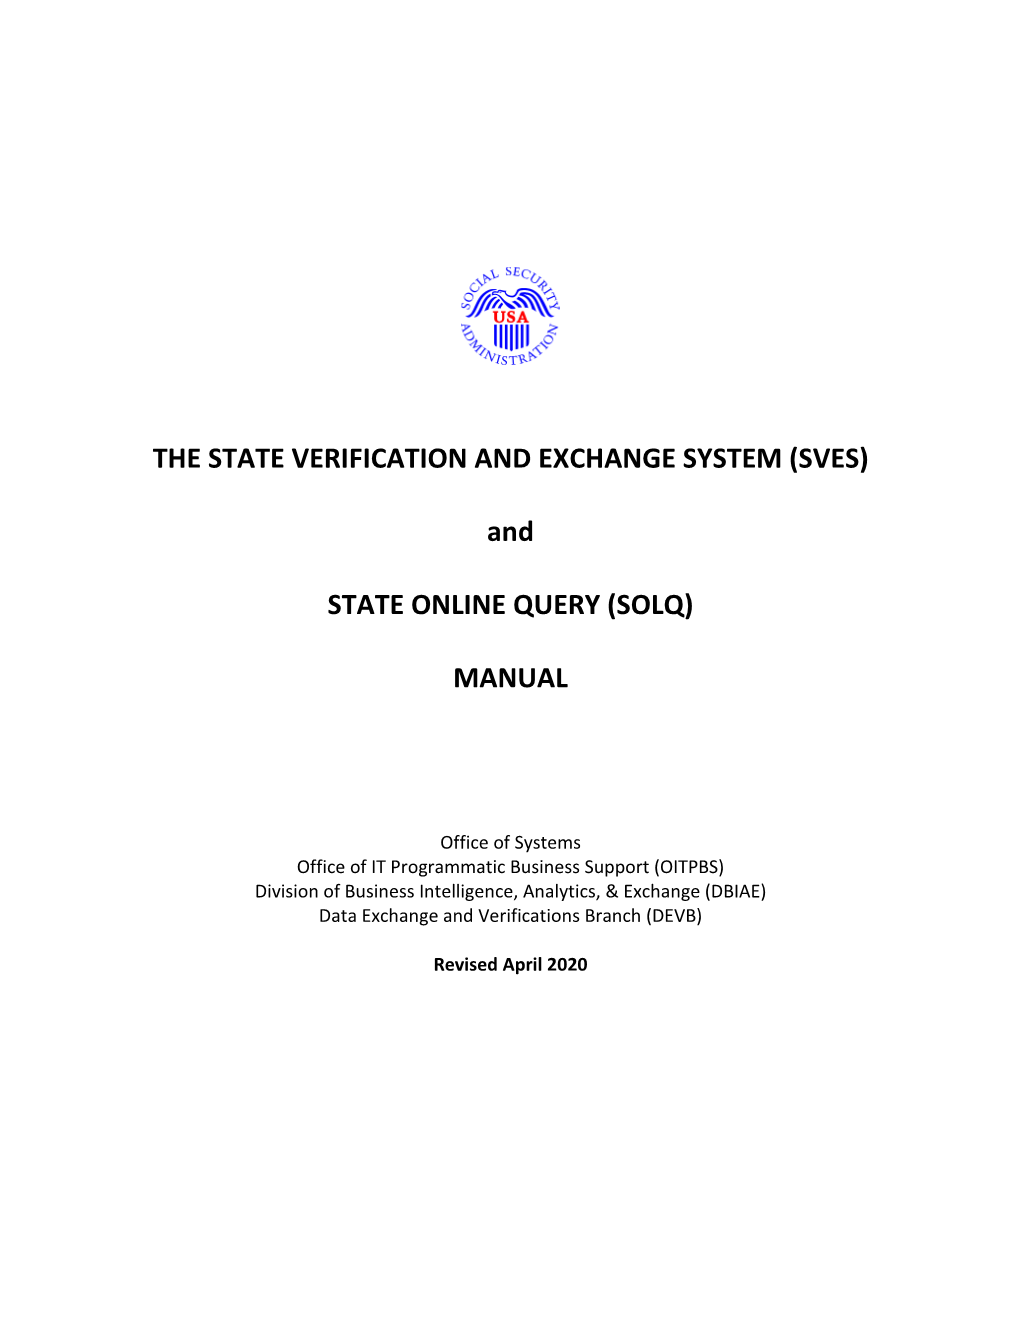 SVES-SOLQ Manual – Section - 1